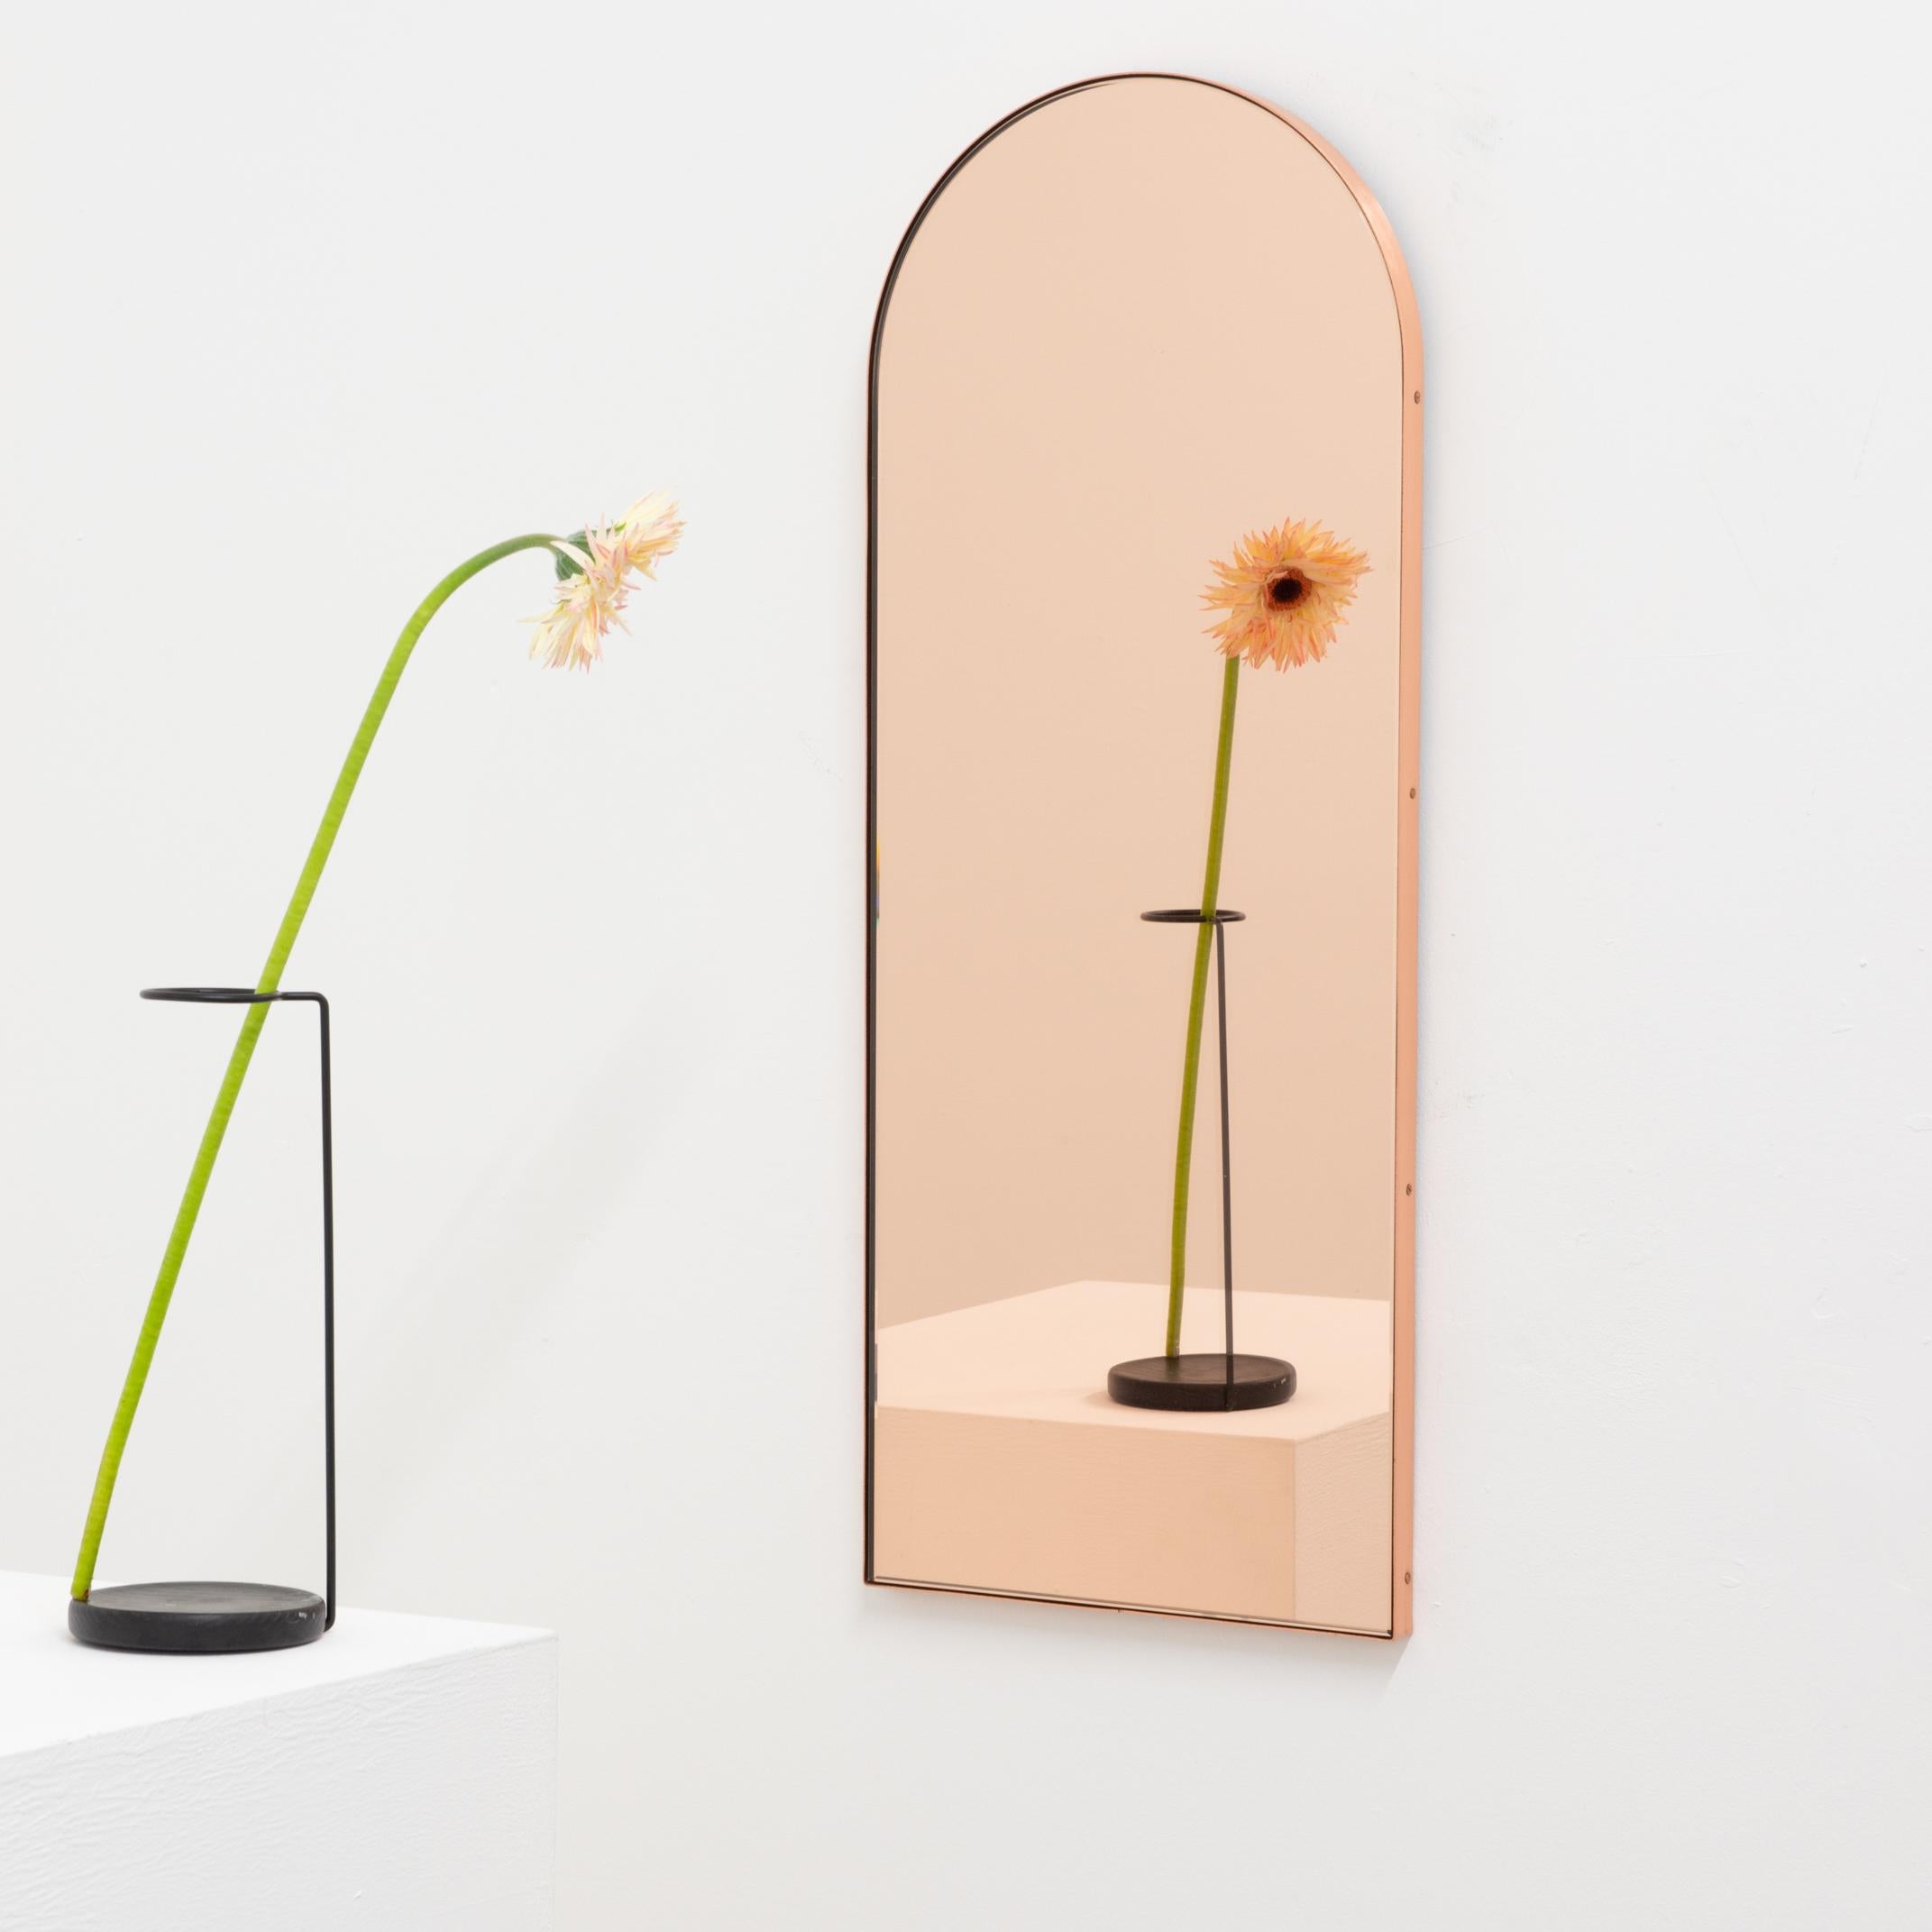 Contemporary arch shaped rose gold / peach mirror with an elegant solid brushed copper frame. Designed and handcrafted in London, UK.

Medium, large and extra-large (37cm x 56cm, 46cm x 71cm and 48cm x 97cm) mirrors are fitted with an ingenious